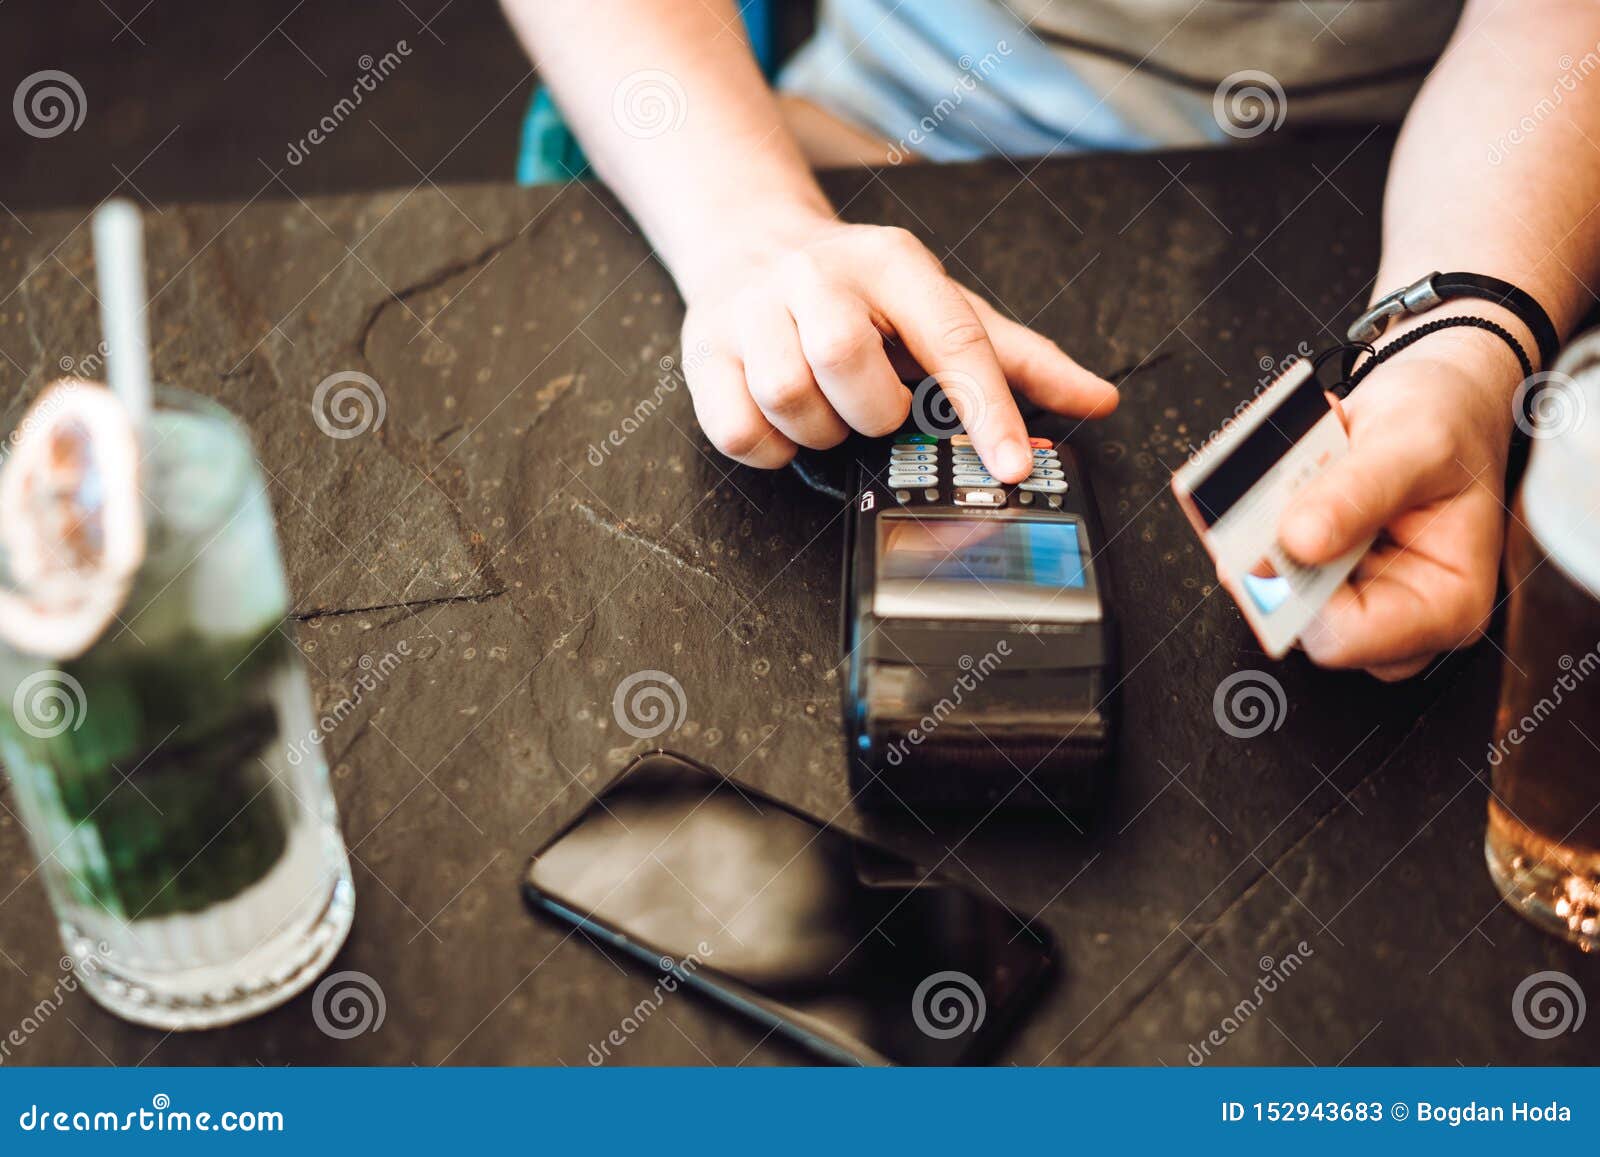 Credit Card Payment At Restaurant. Man Entering Pin Code For Credit Card Purchase Stock Image ...